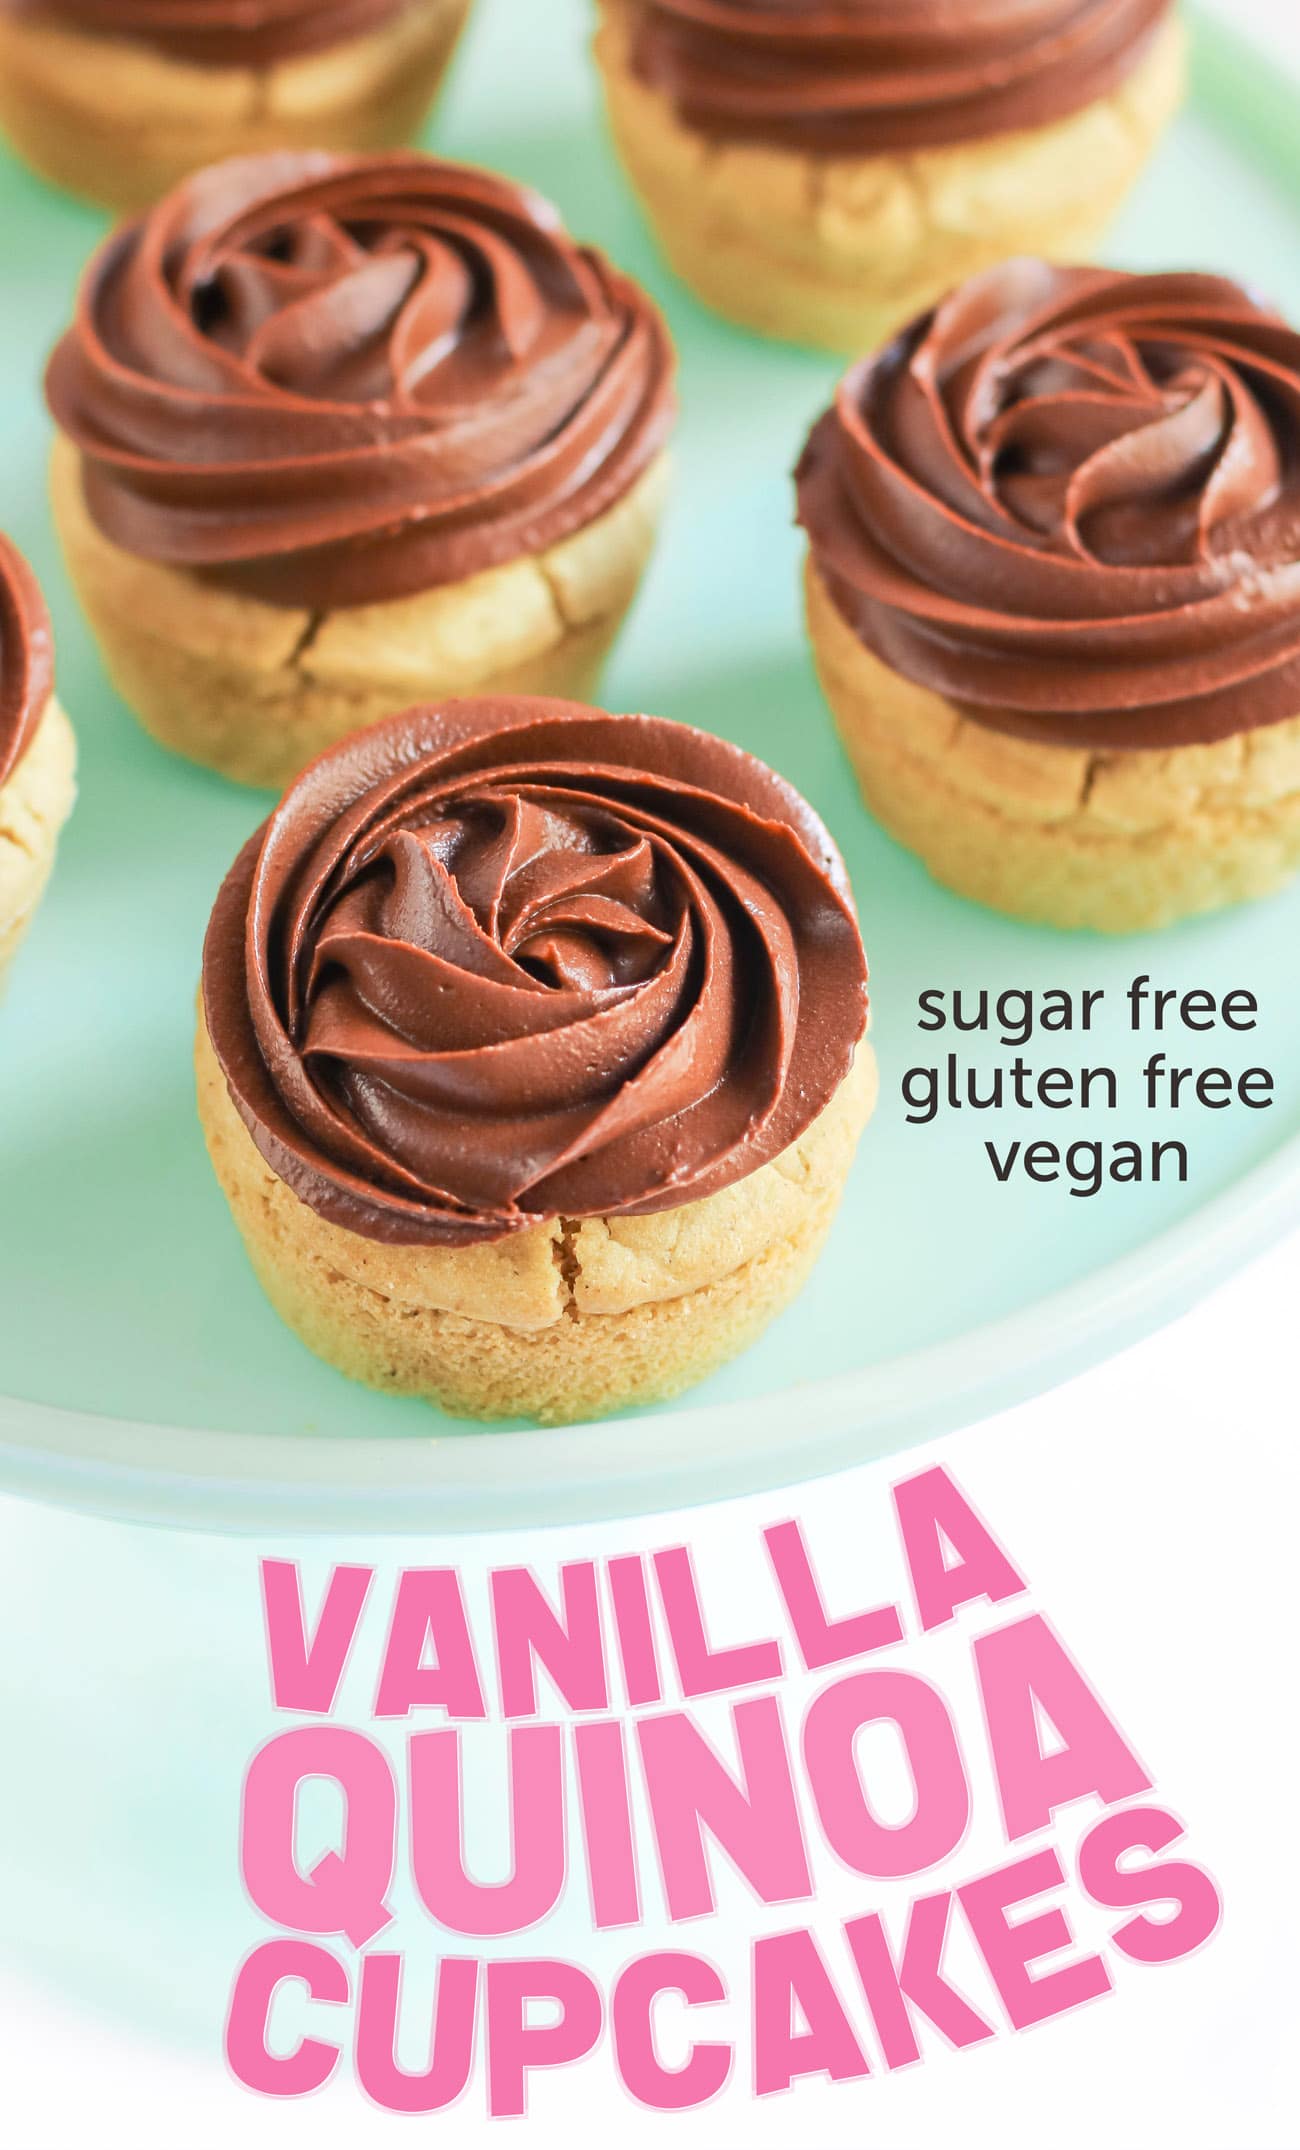 These Healthy Vanilla Quinoa Cupcakes are fluffy, springy, and moist! Top them with a healthy frosting and you've got the most nutritious, guilt-free treat! Made with quinoa flour, sorghum flour, coconut yogurt, and coconut milk, so they're gluten free, dairy free, vegan, and sugar free!